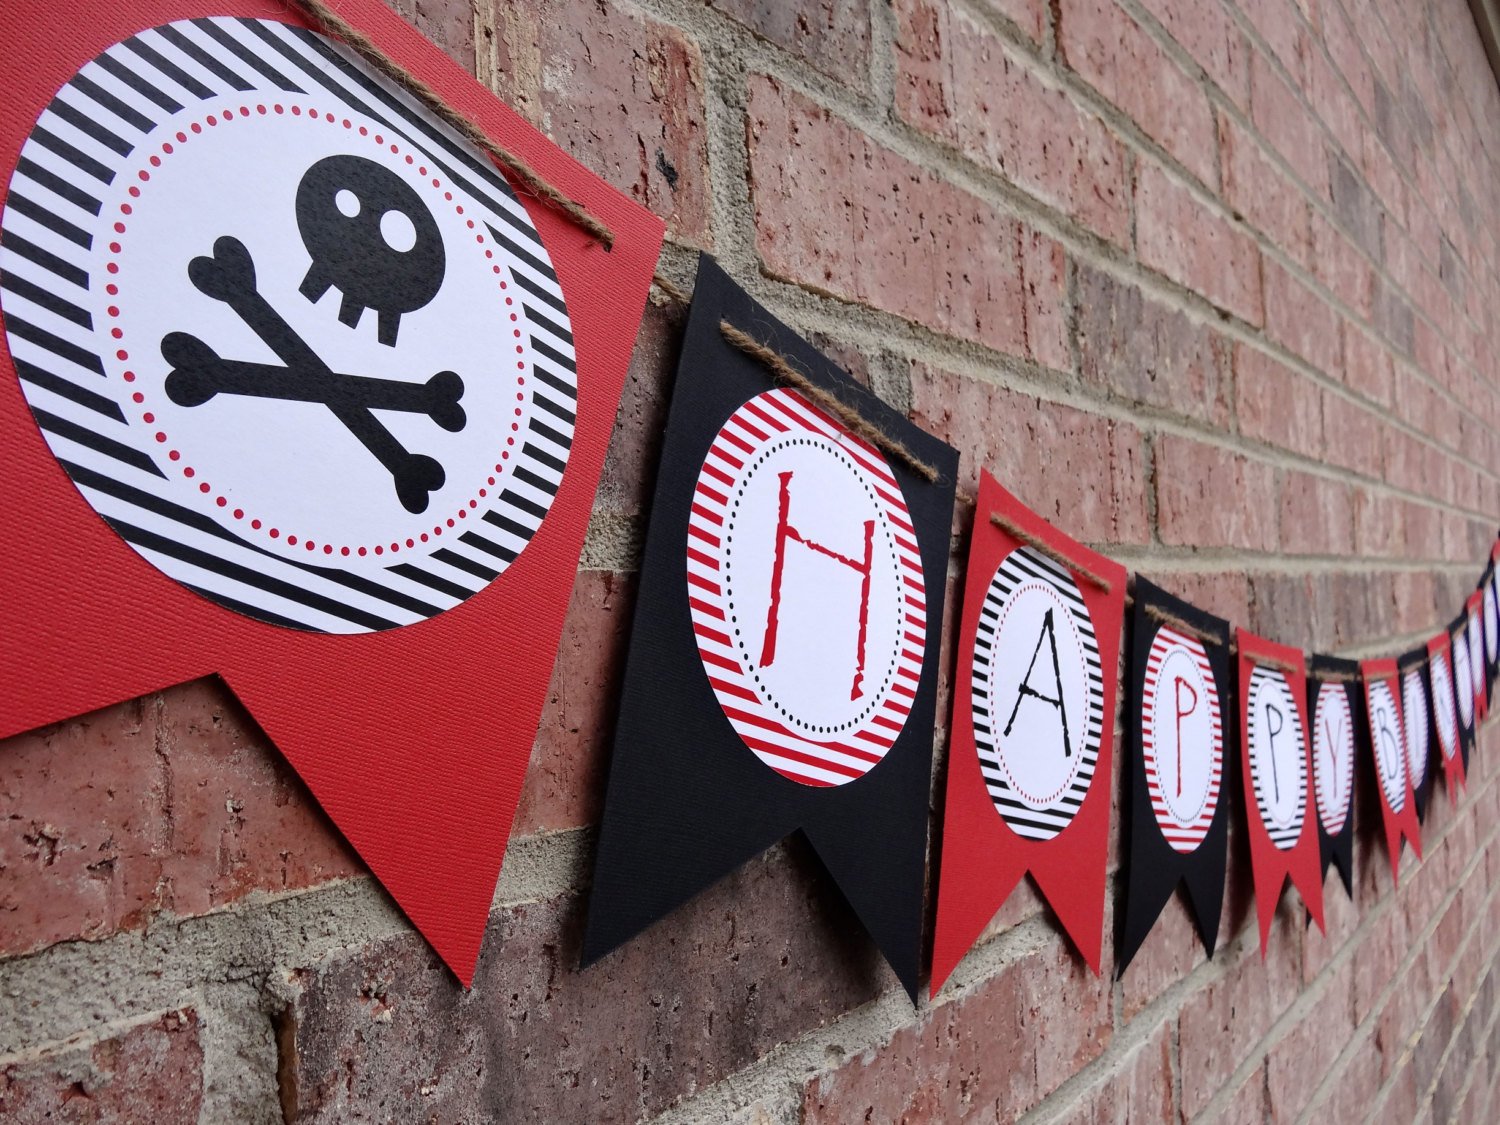 How to Make Your Pirate Birthday Party the Most Awesome Ever - Part 1